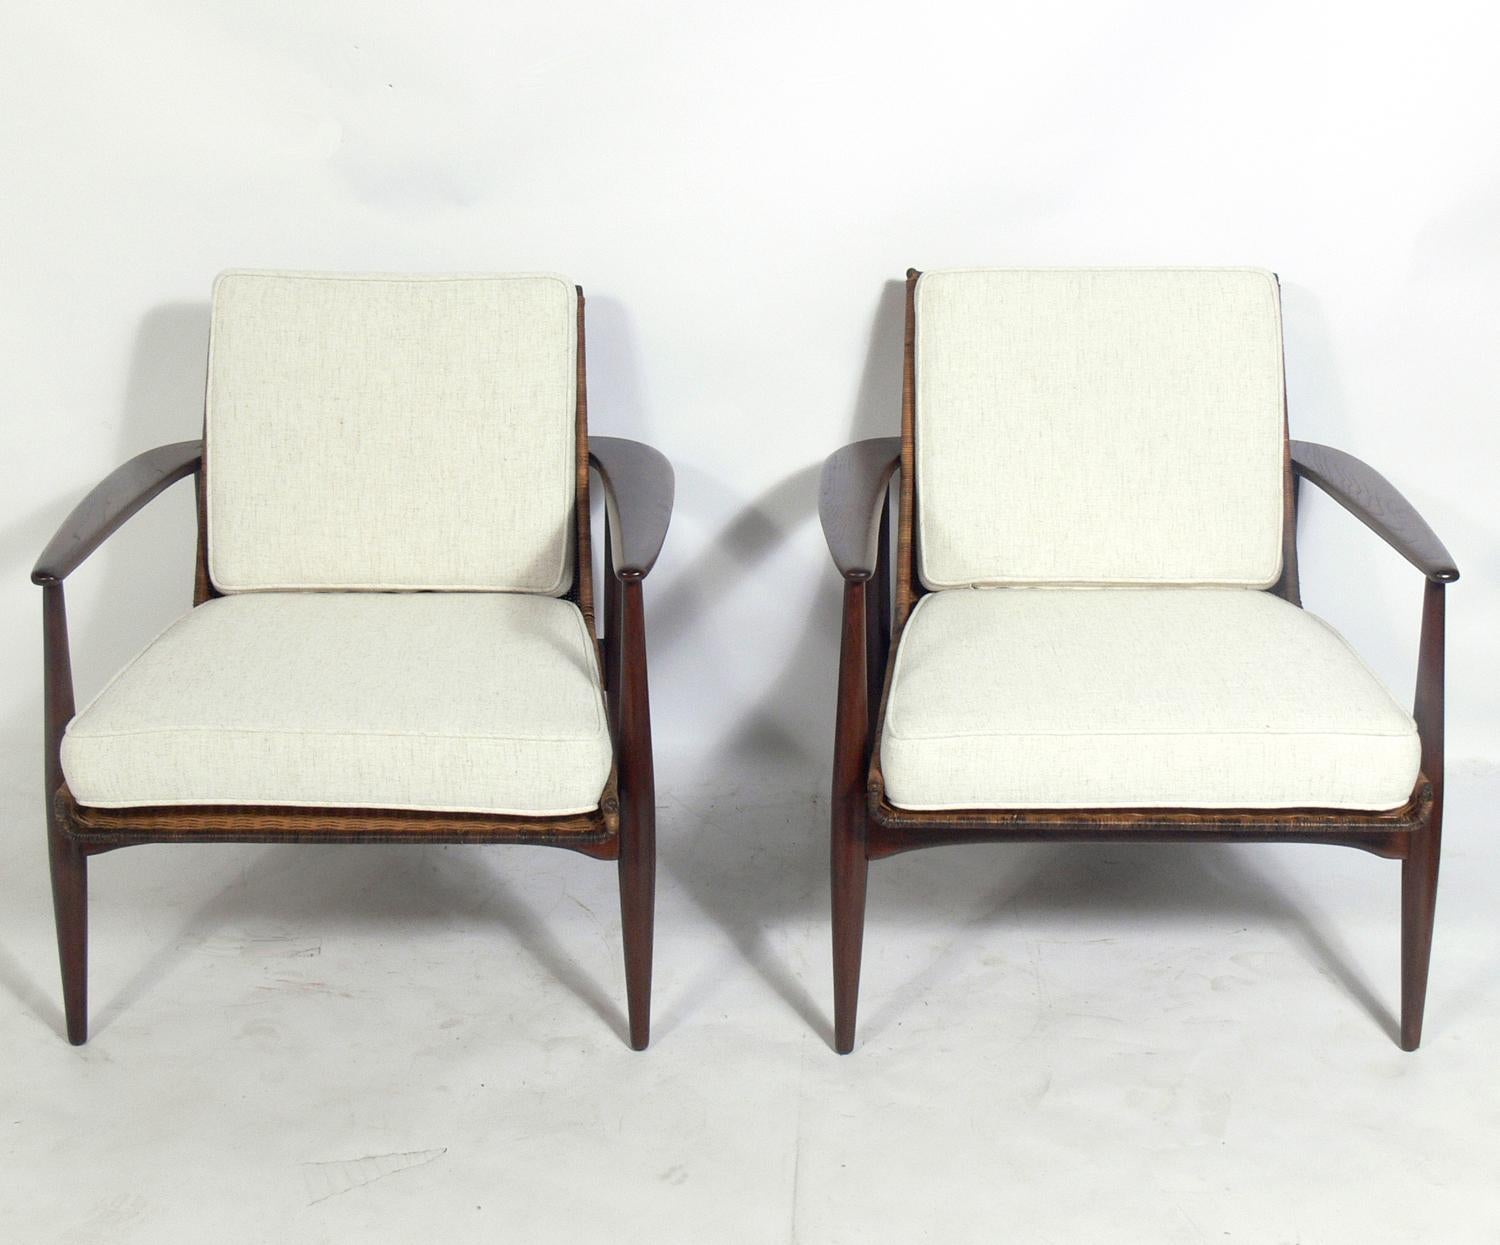 Pair of midcentury walnut and rattan lounge chairs, designed by Lawrence Peabody for Richardson Nemschoff, American, circa 1950s. The walnut has been refinished and the cushions have been reupholstered. Rattan retains warm original patina.